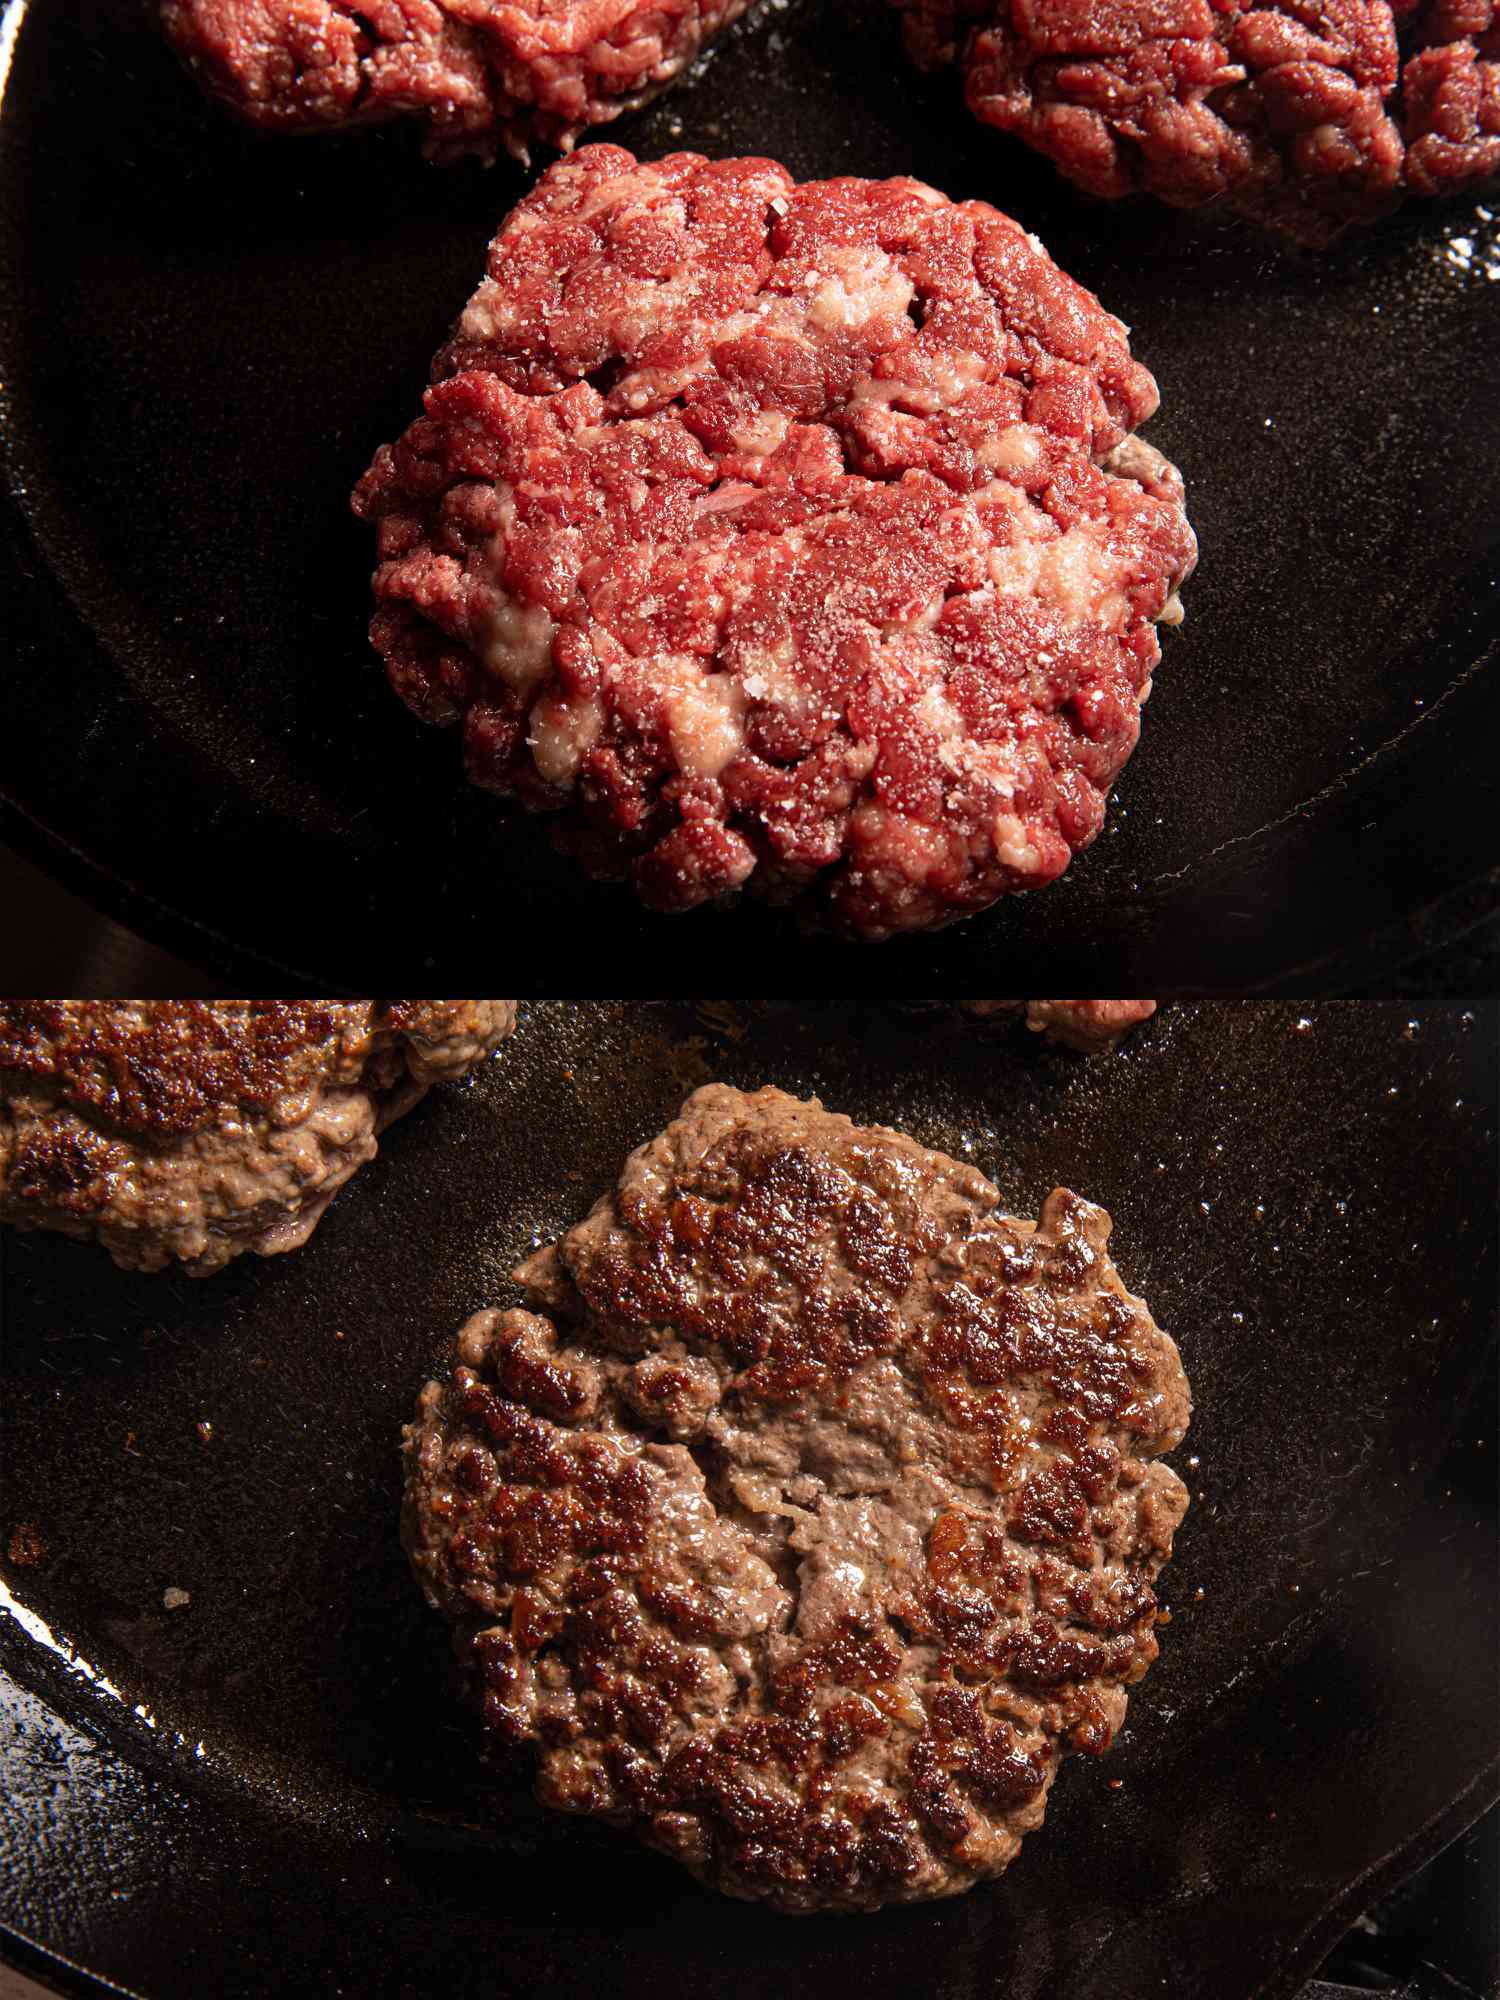 Two image collage of a waygu burger in a pan before and after being cooked